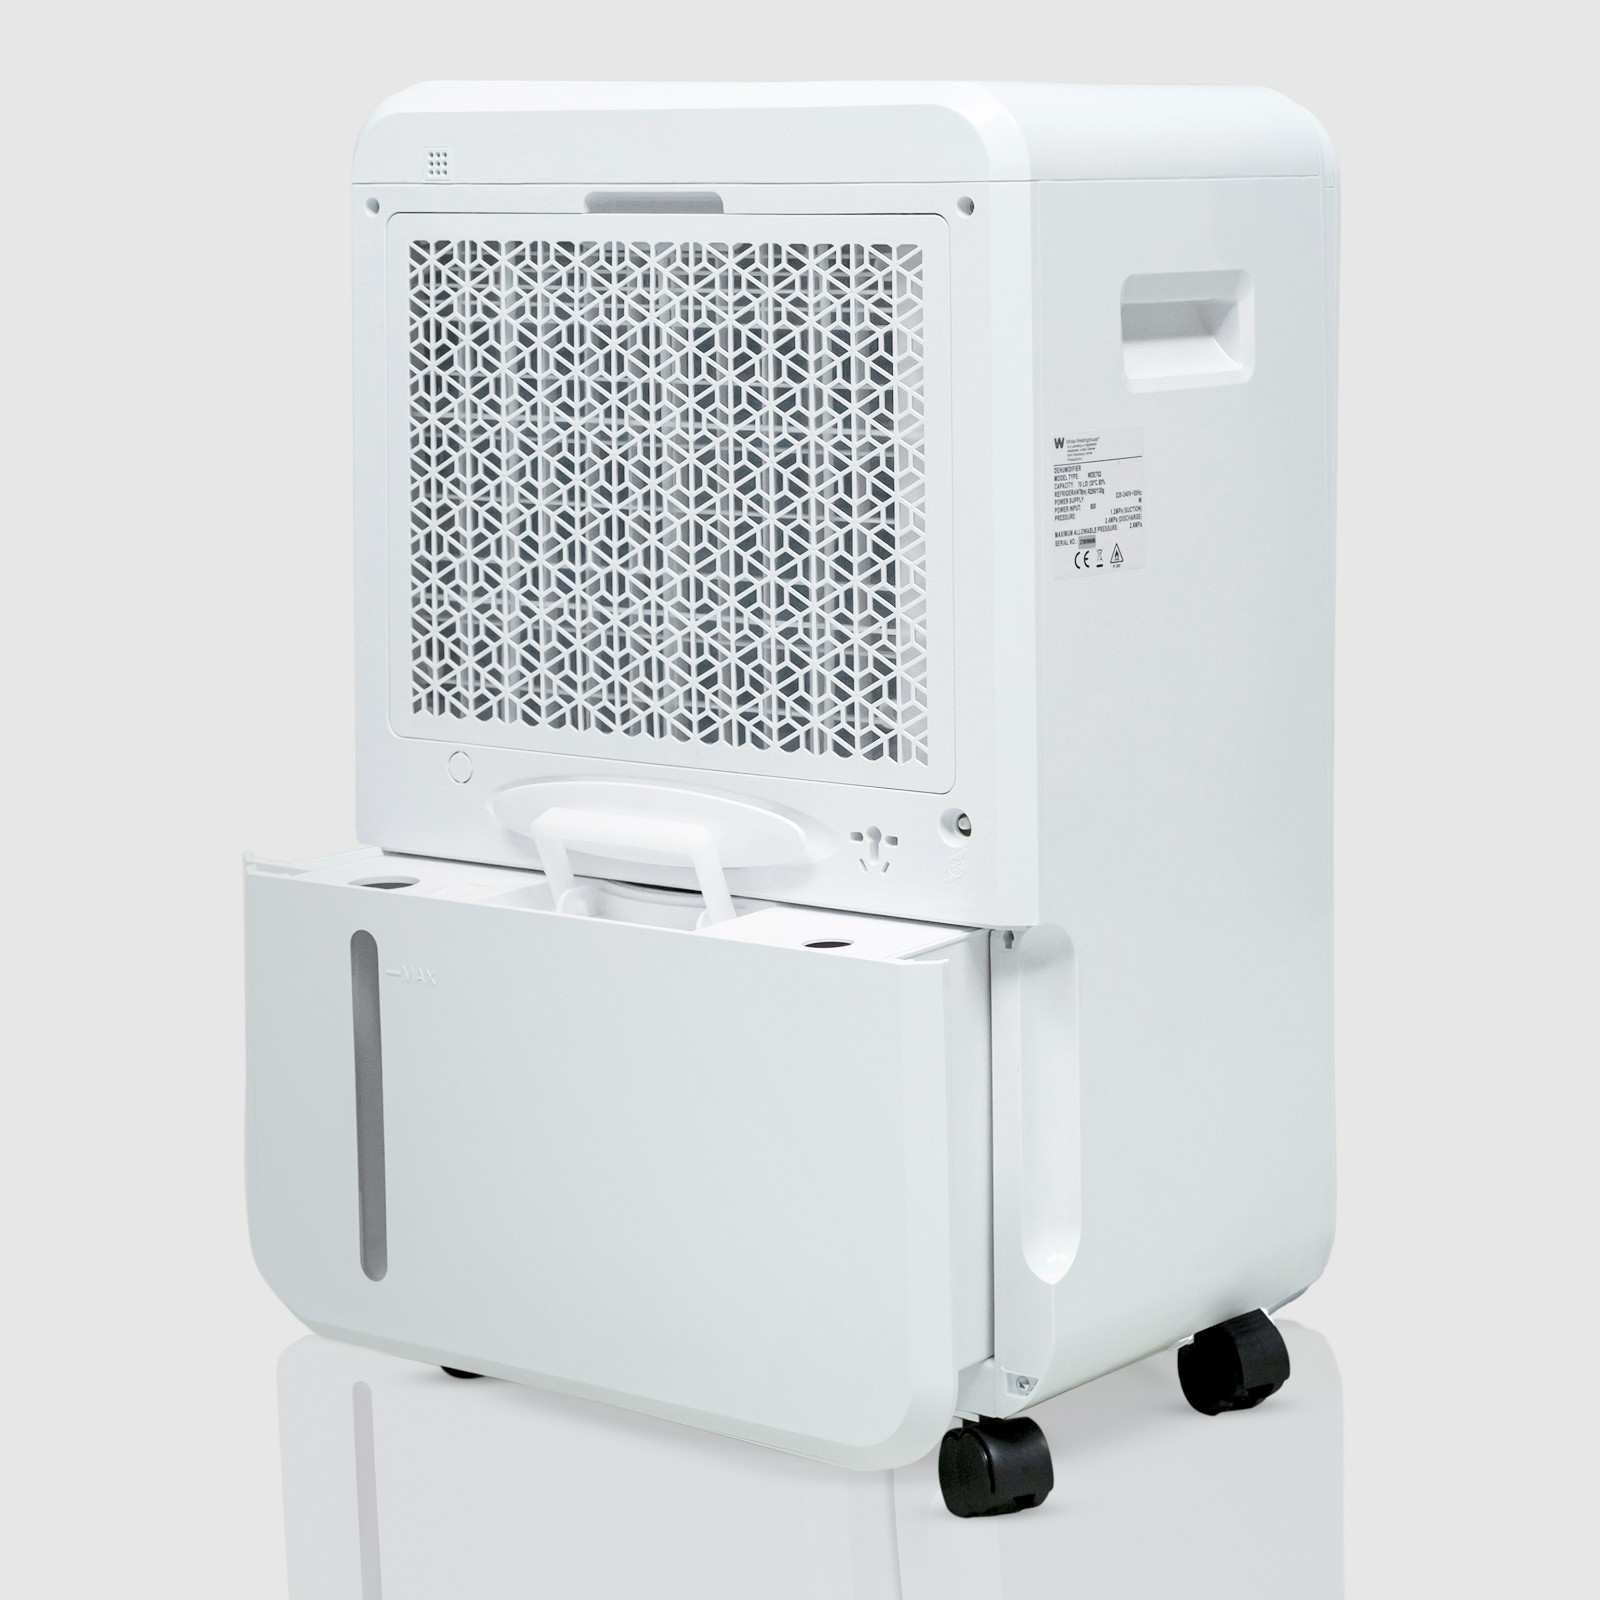 Rear angled view of the White Westinghouse Dehumidifier WDE702 with the water tank partially removed, showcasing the back air vent, built-in handle, and casters for easy mobility. The sleek white design is suitable for maintaining optimal humidity levels in residential and commercial spaces.